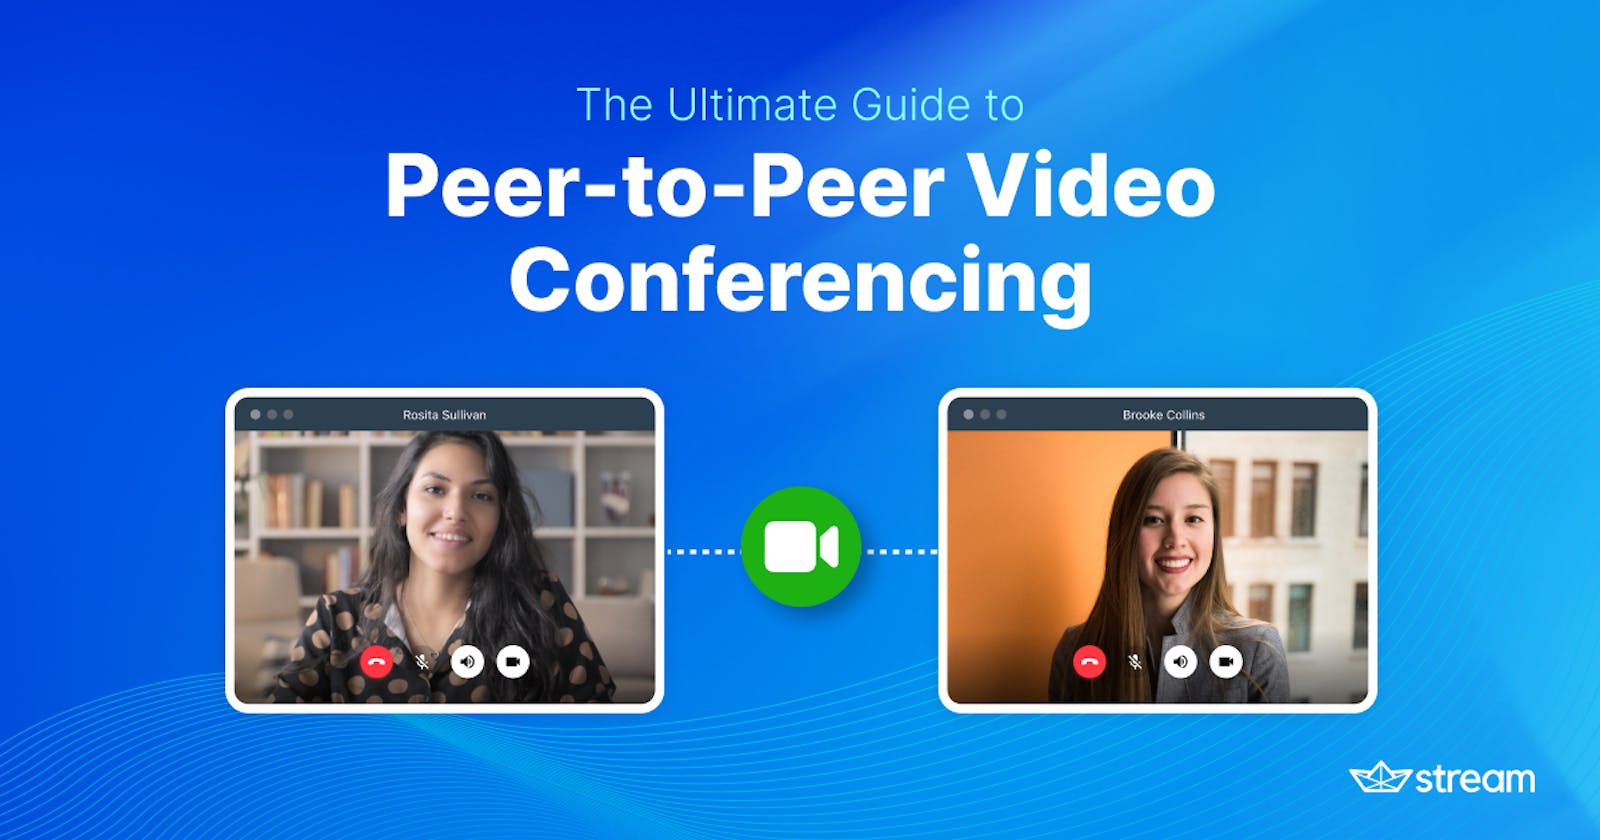 The Ultimate Guide to Peer-to-Peer Video Conferencing